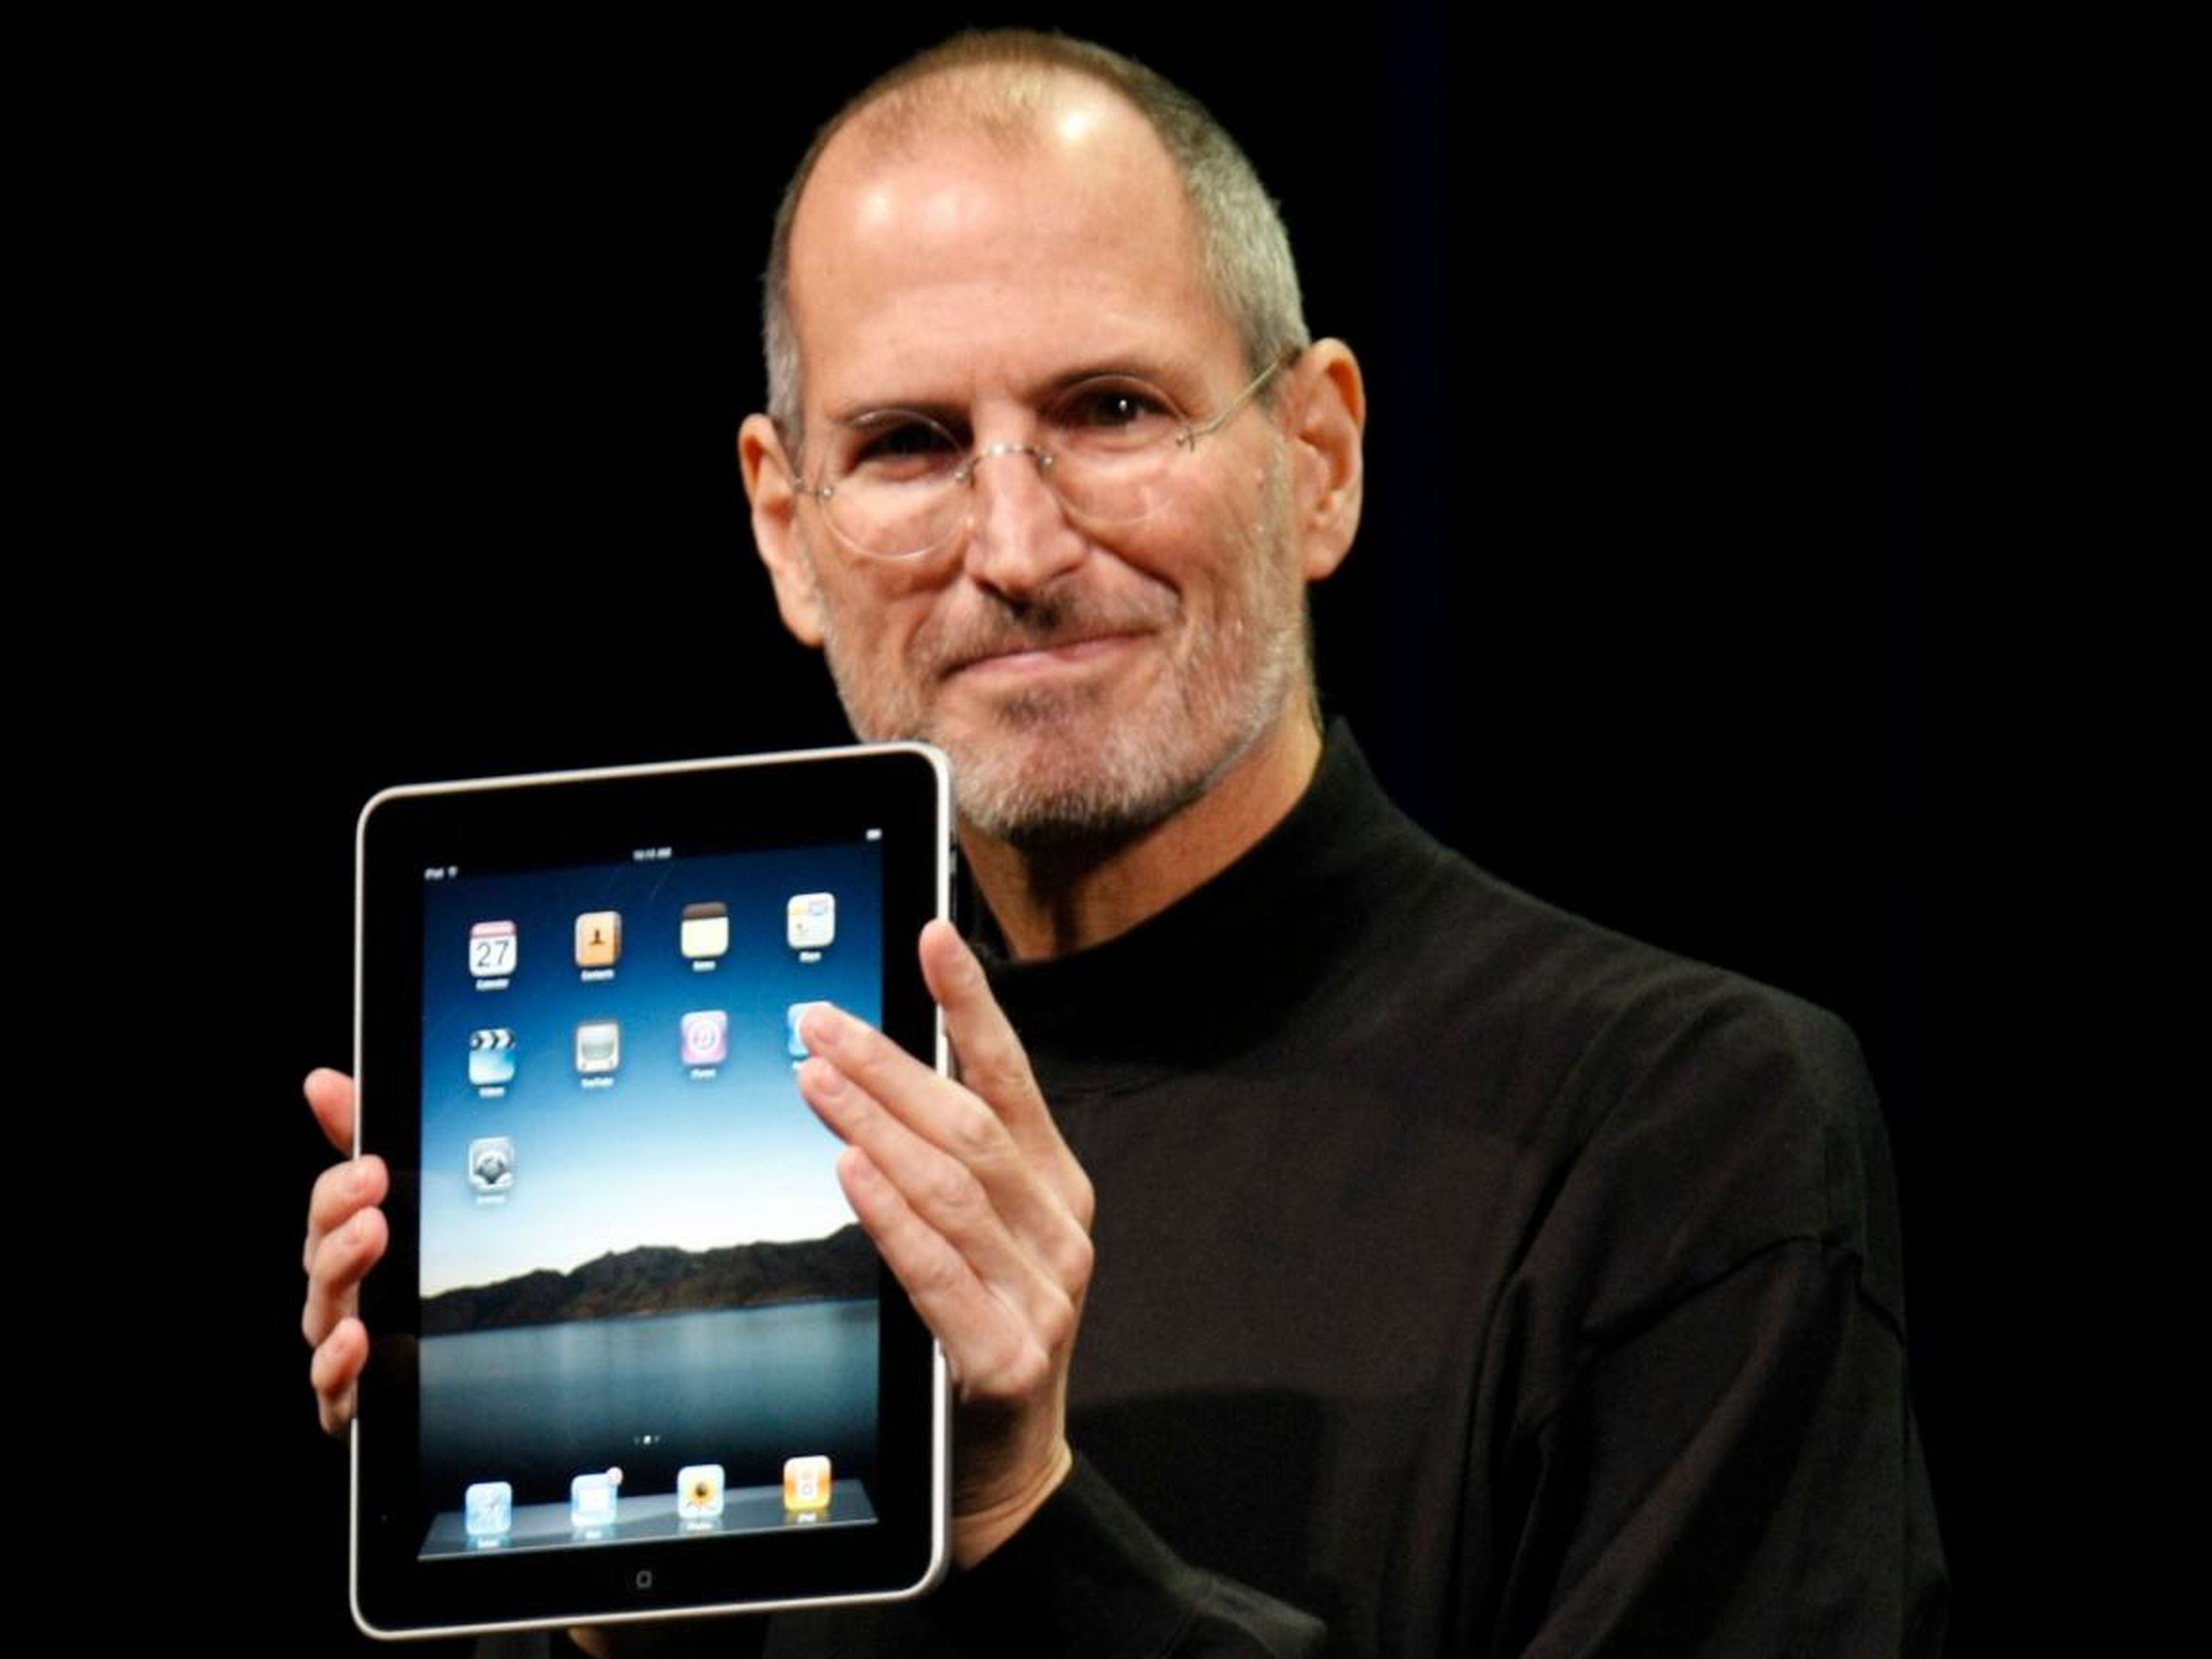 Apple launched the iPad in 2010, but it appears that Jobs had been thinking about tablets since as far back as 1983.